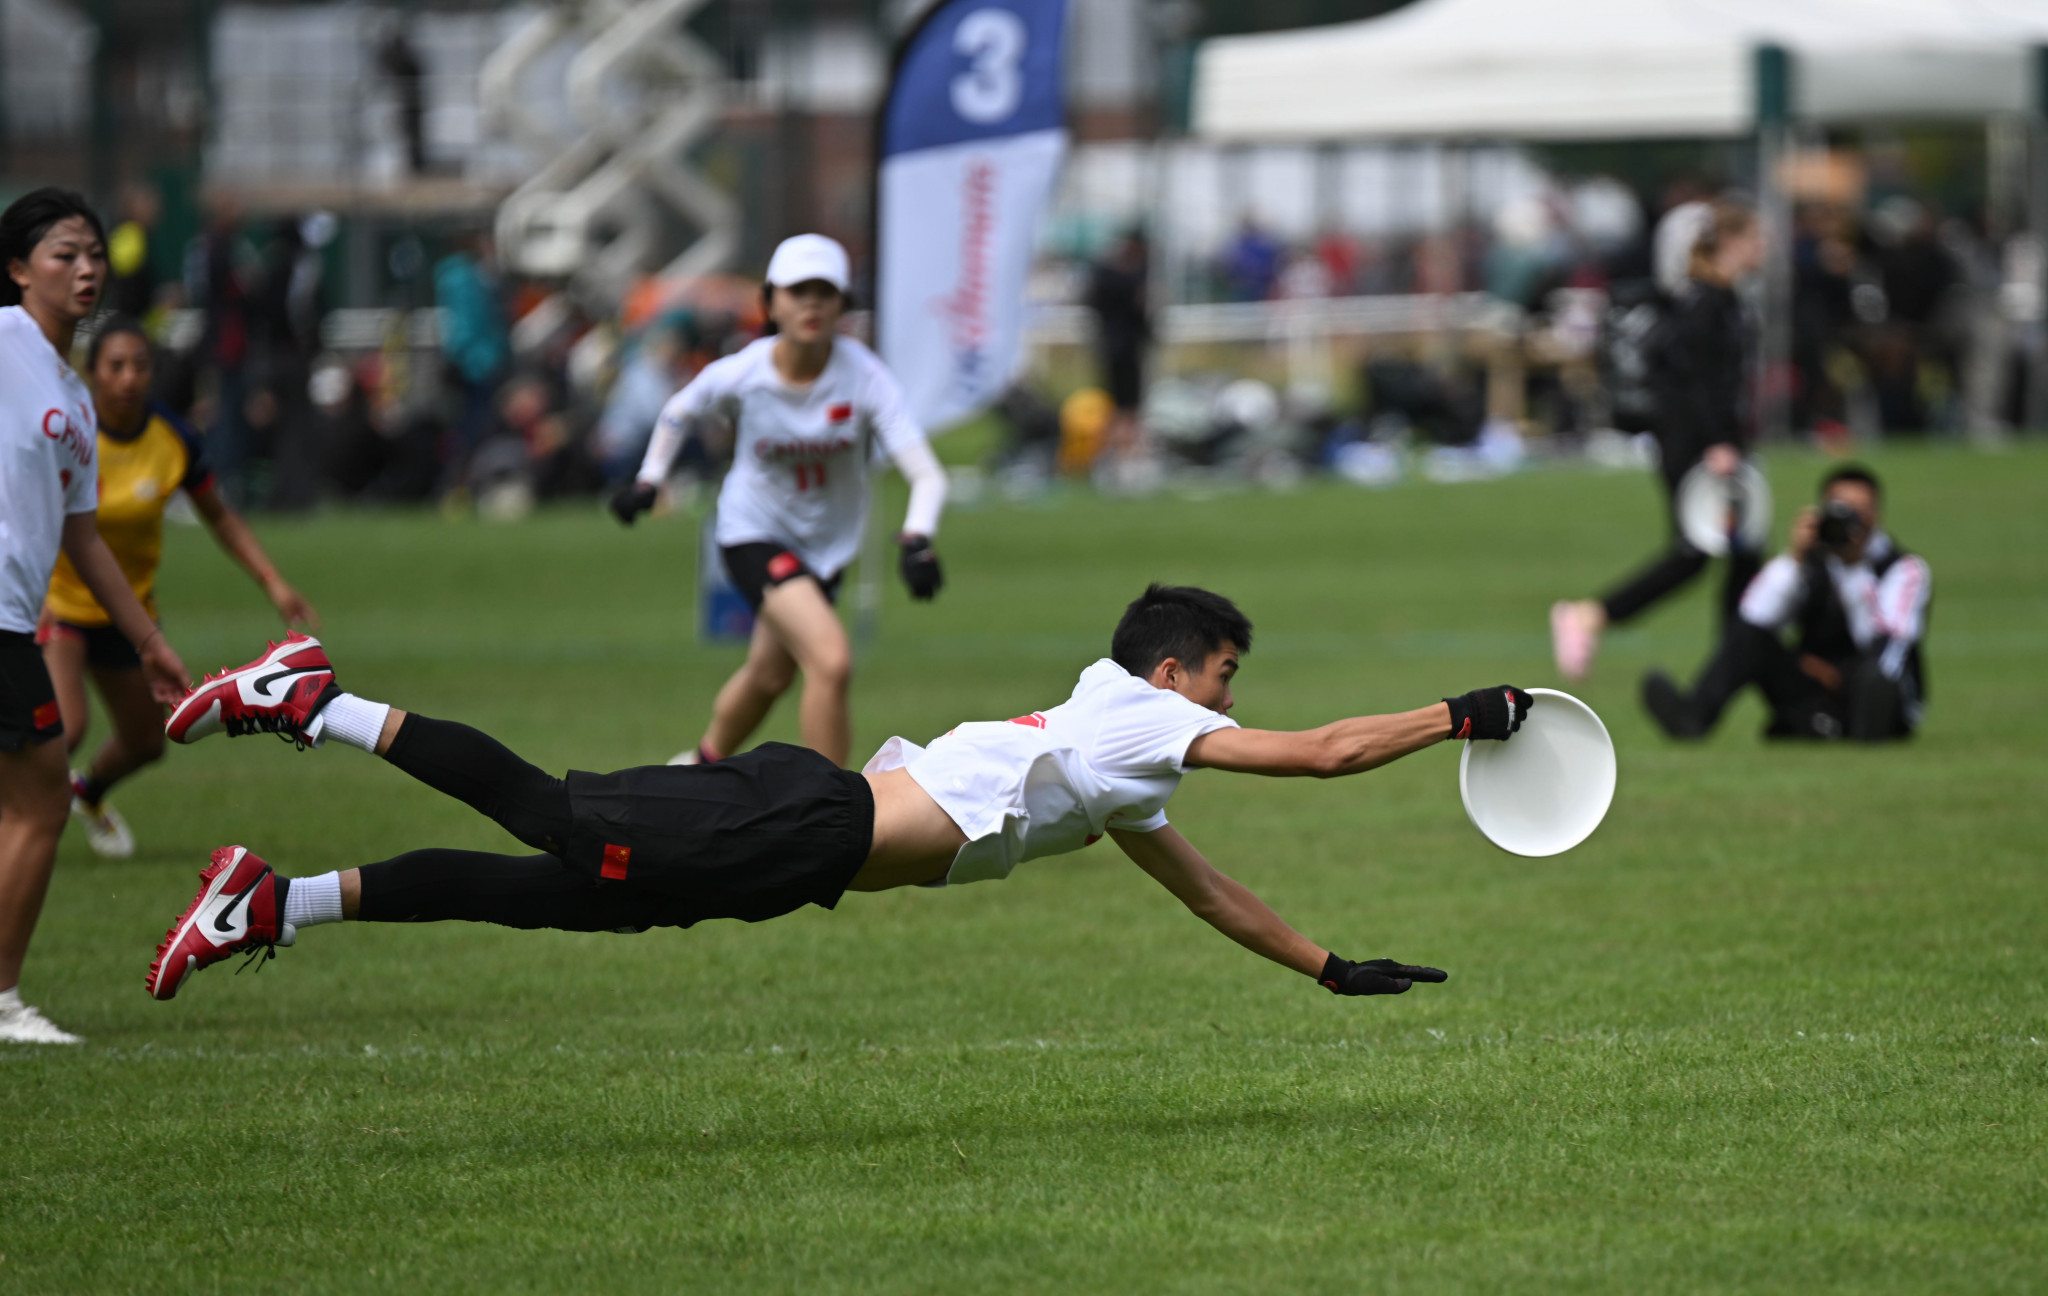 China, which has seen huge growth in flying disc, has sent 56 players to Nottingham to compete across the open, women's and mixed team categories ©WFDF